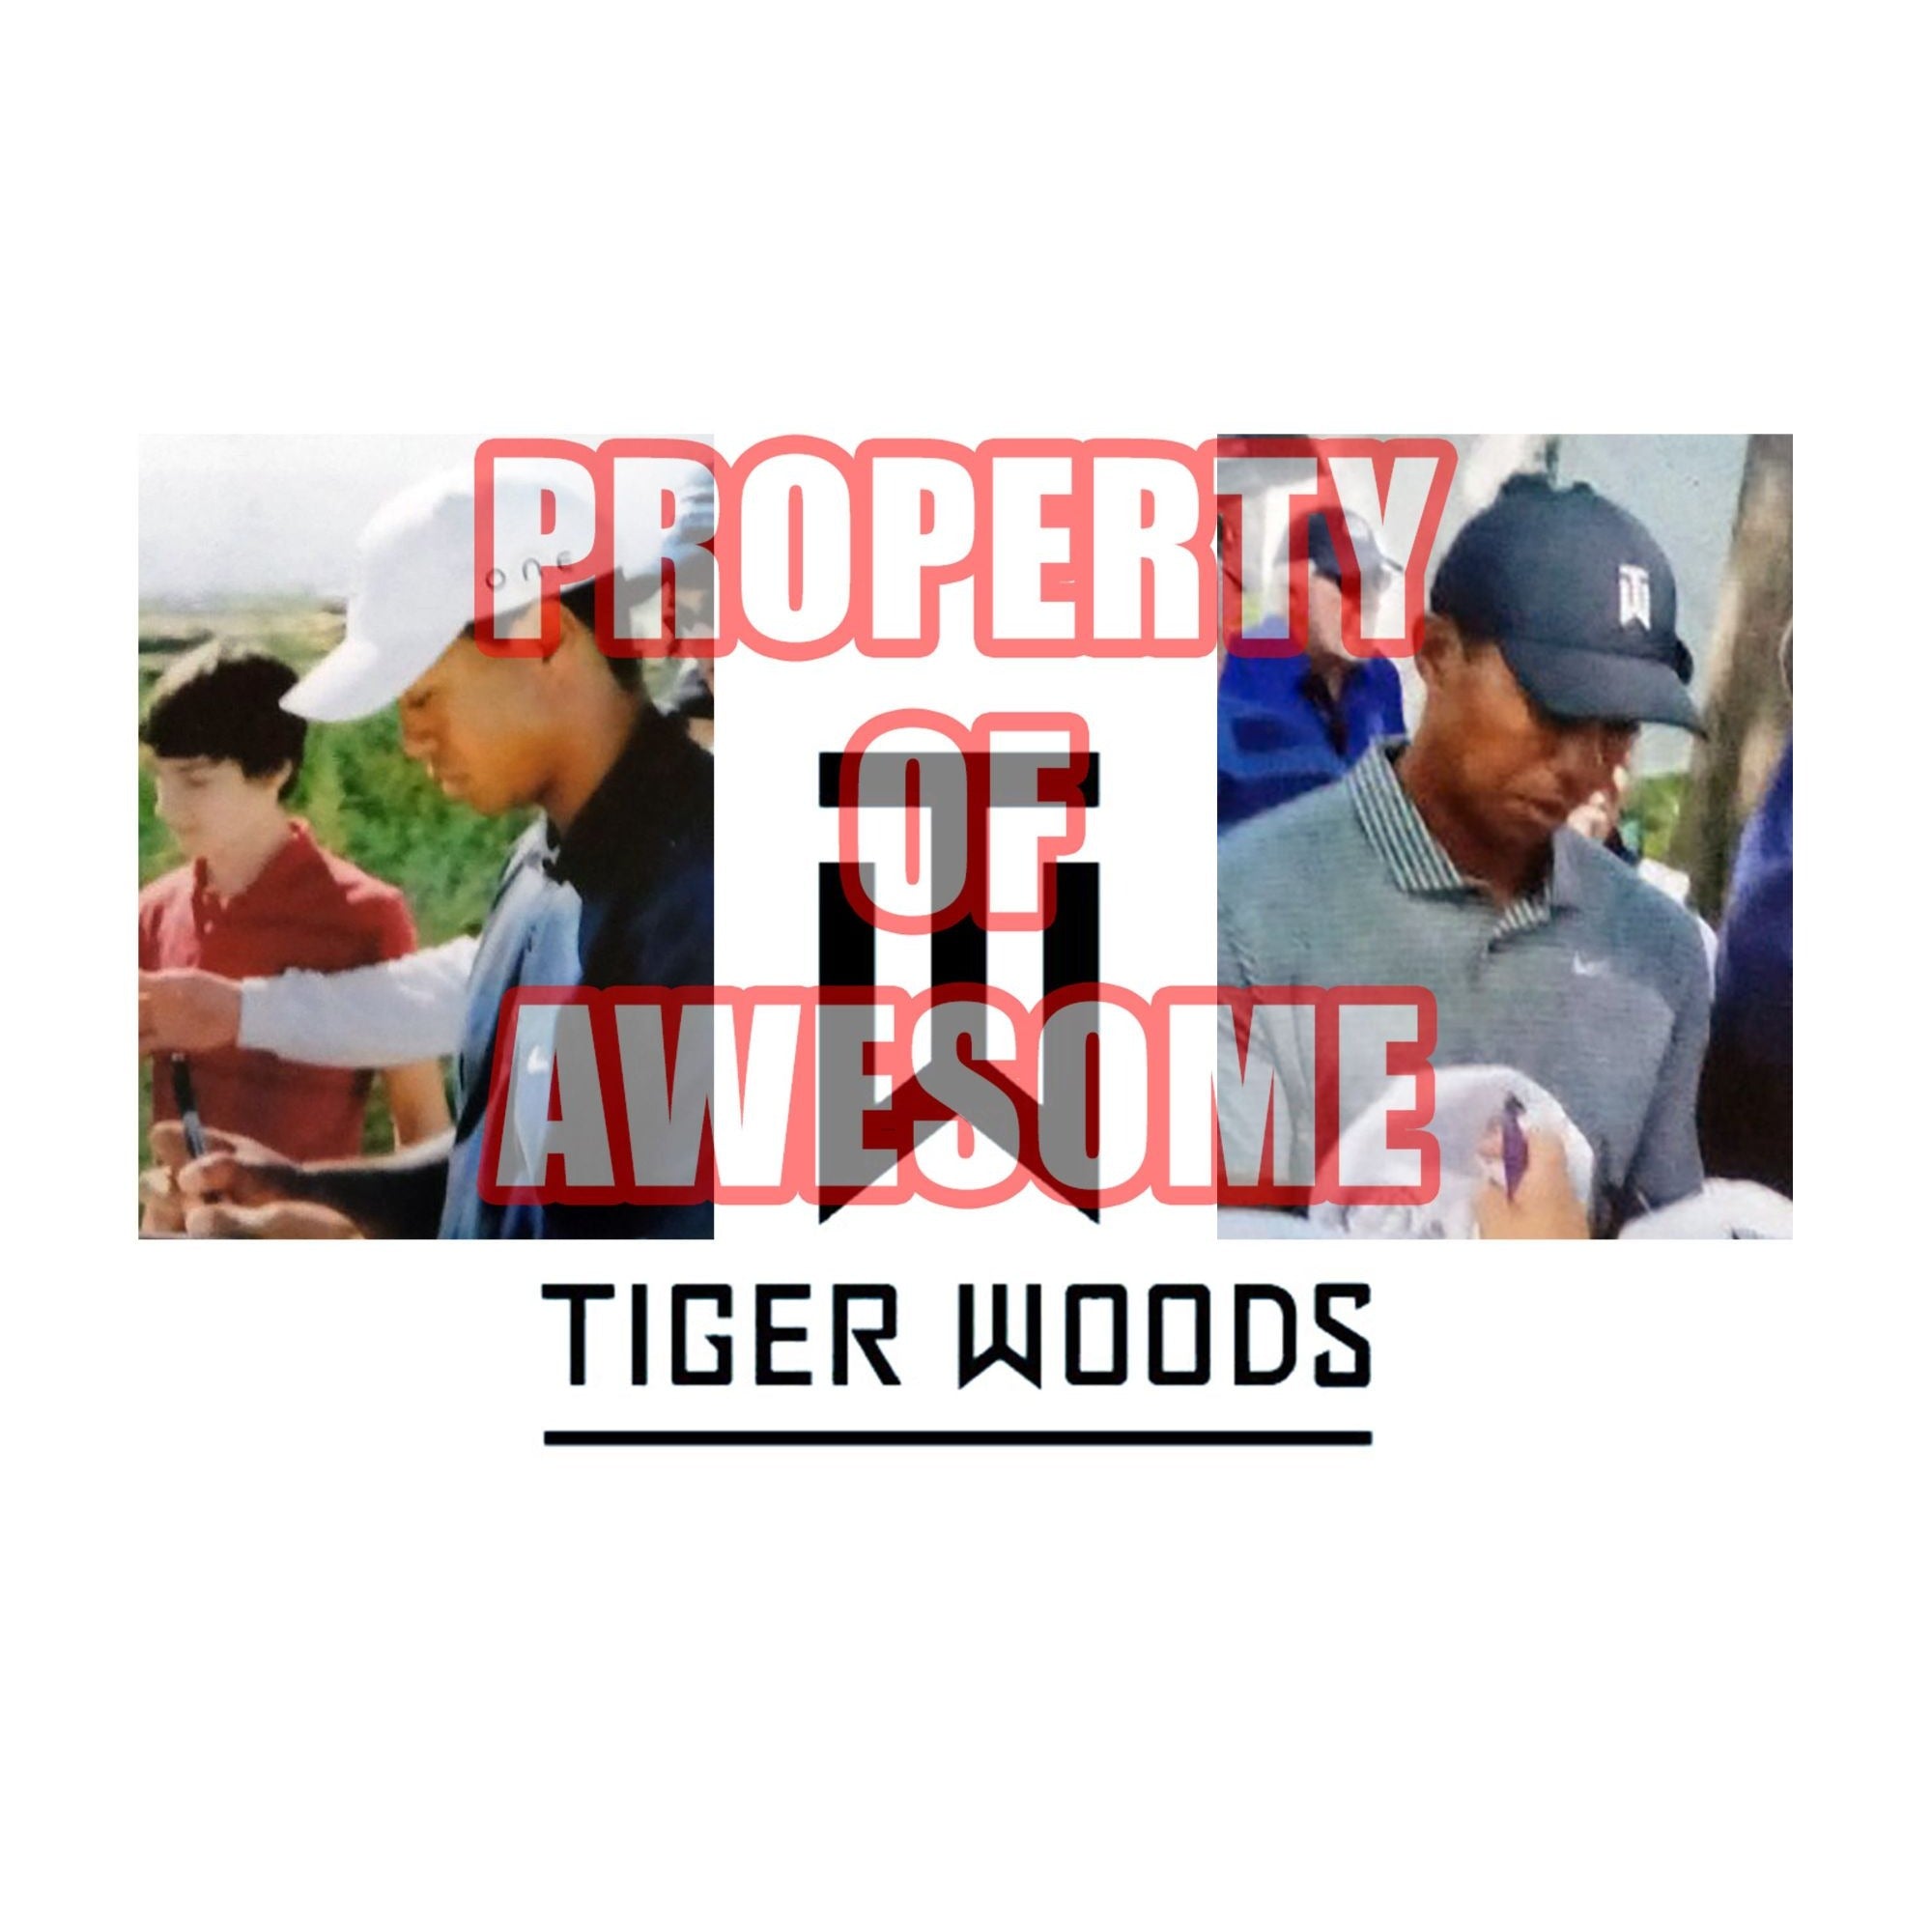 Tiger Woods 2006 British Open 8 x 10 signed photo with proof